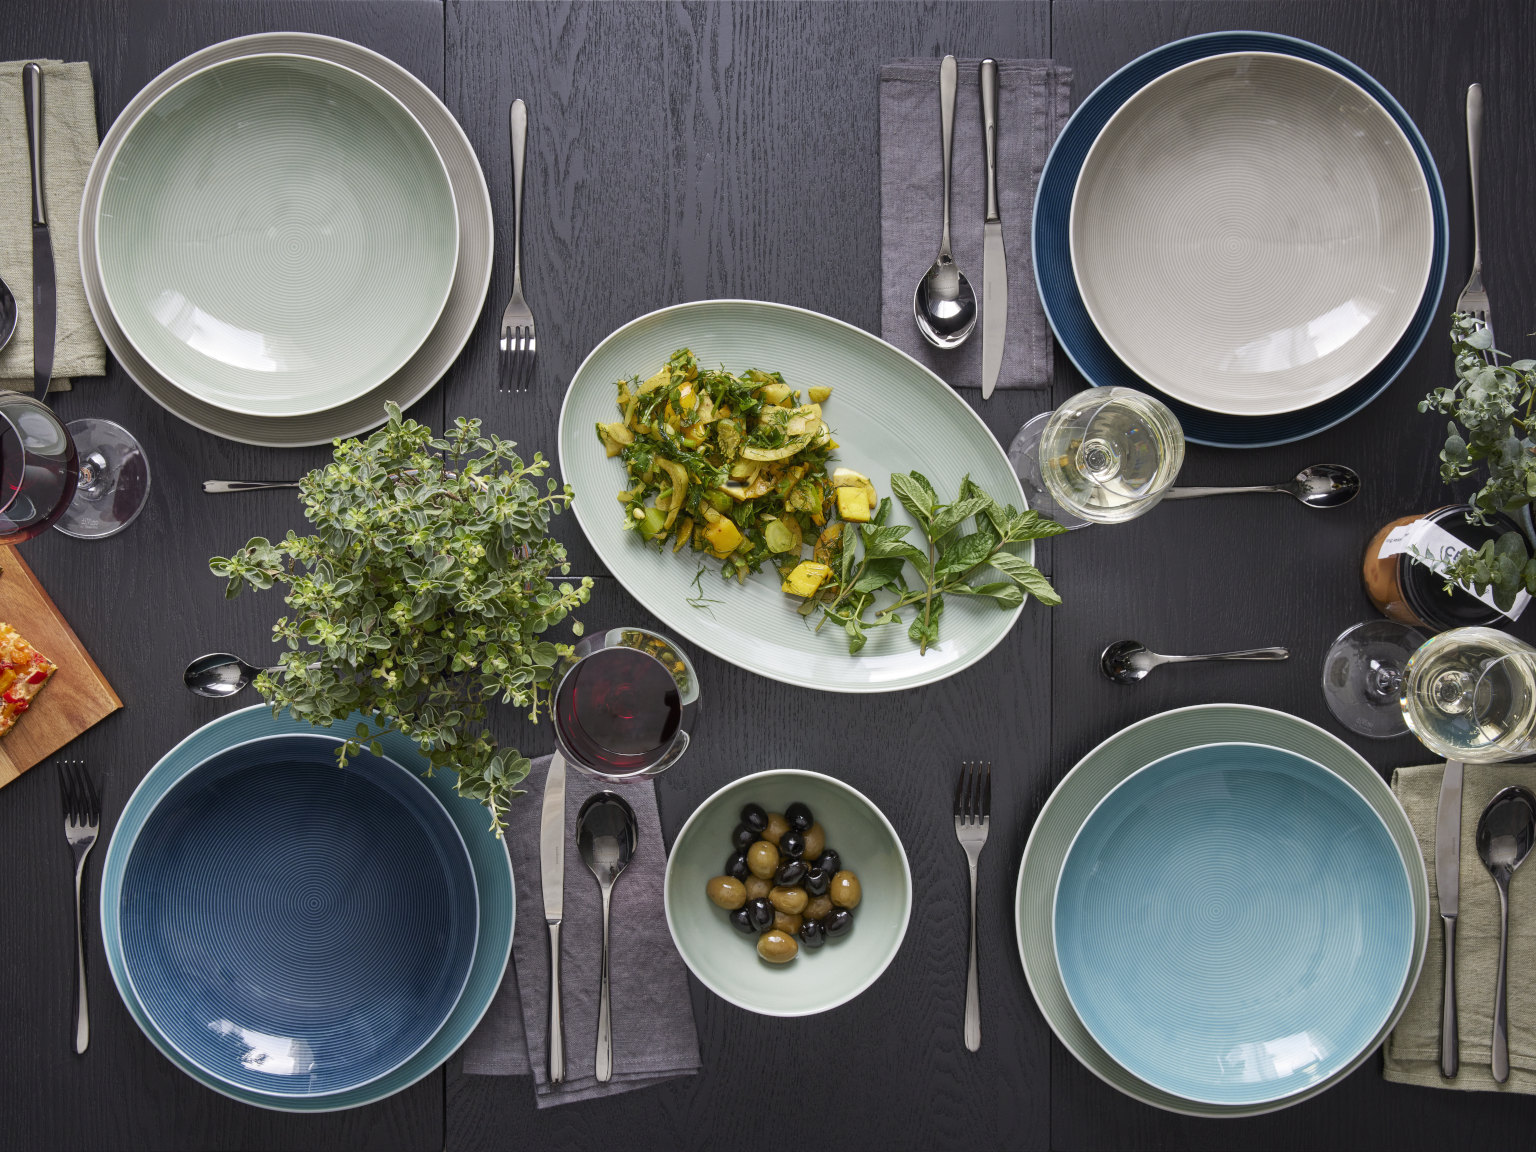 Thomas Loft porcelain collection dark table with different coloured plates & platter with food in the middle